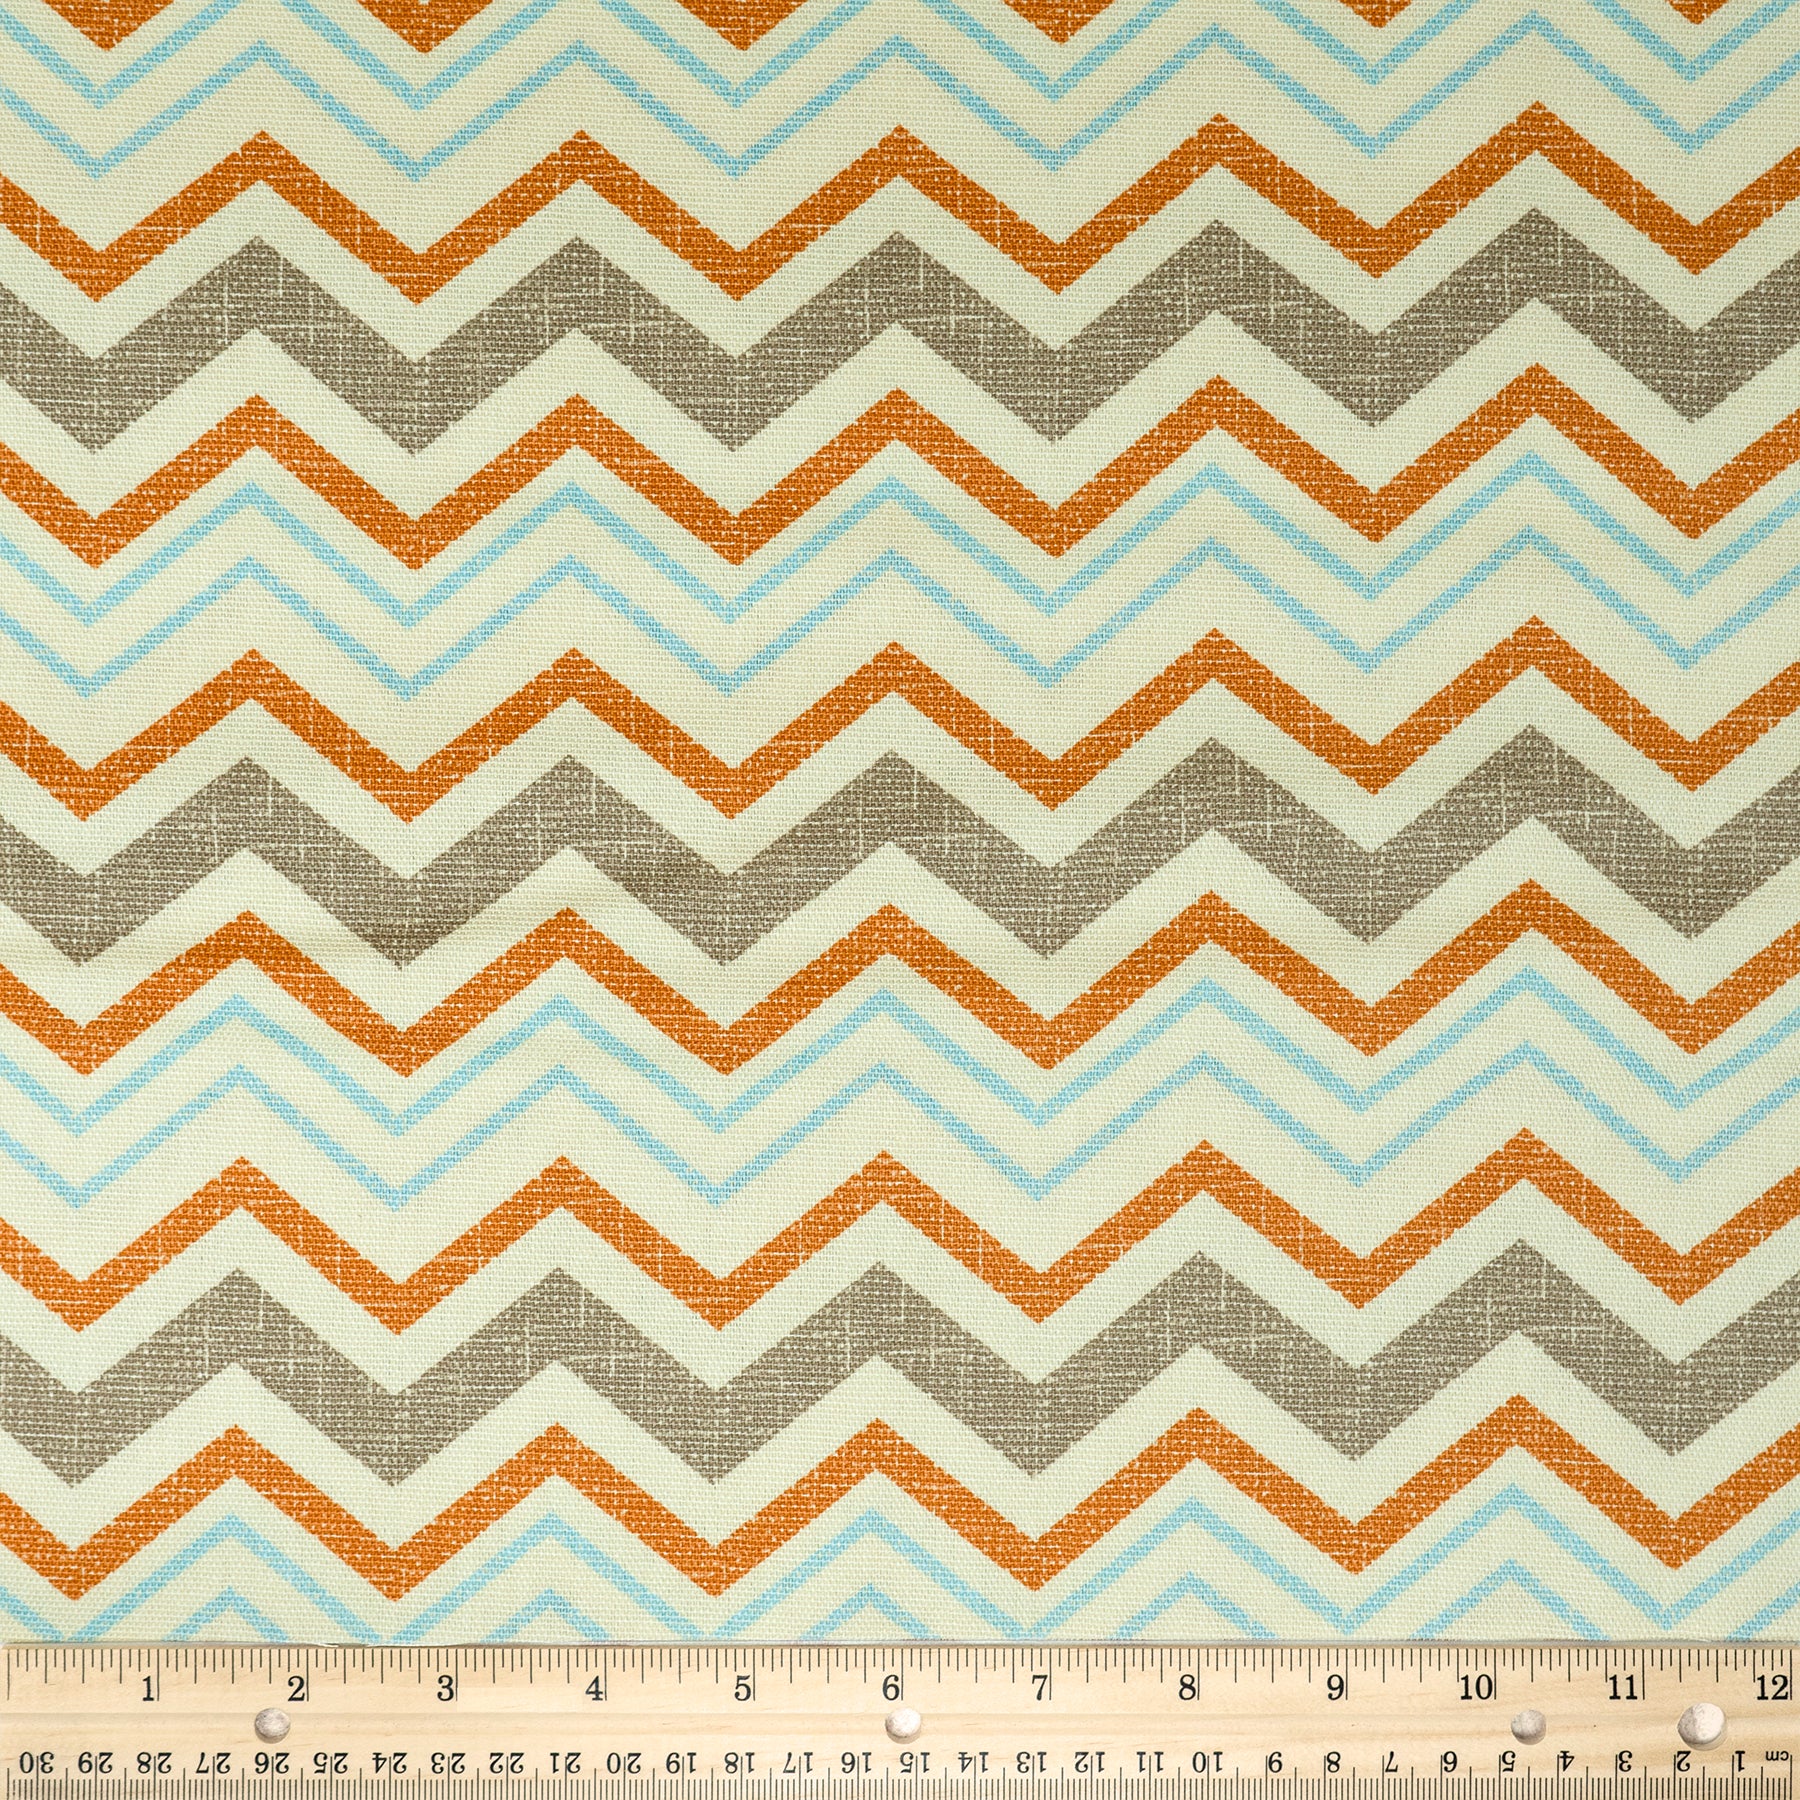 Waverly Inspirations 100% Cotton Duck 45" Width Chevron Adobe Color Sewing Fabric by the Yard